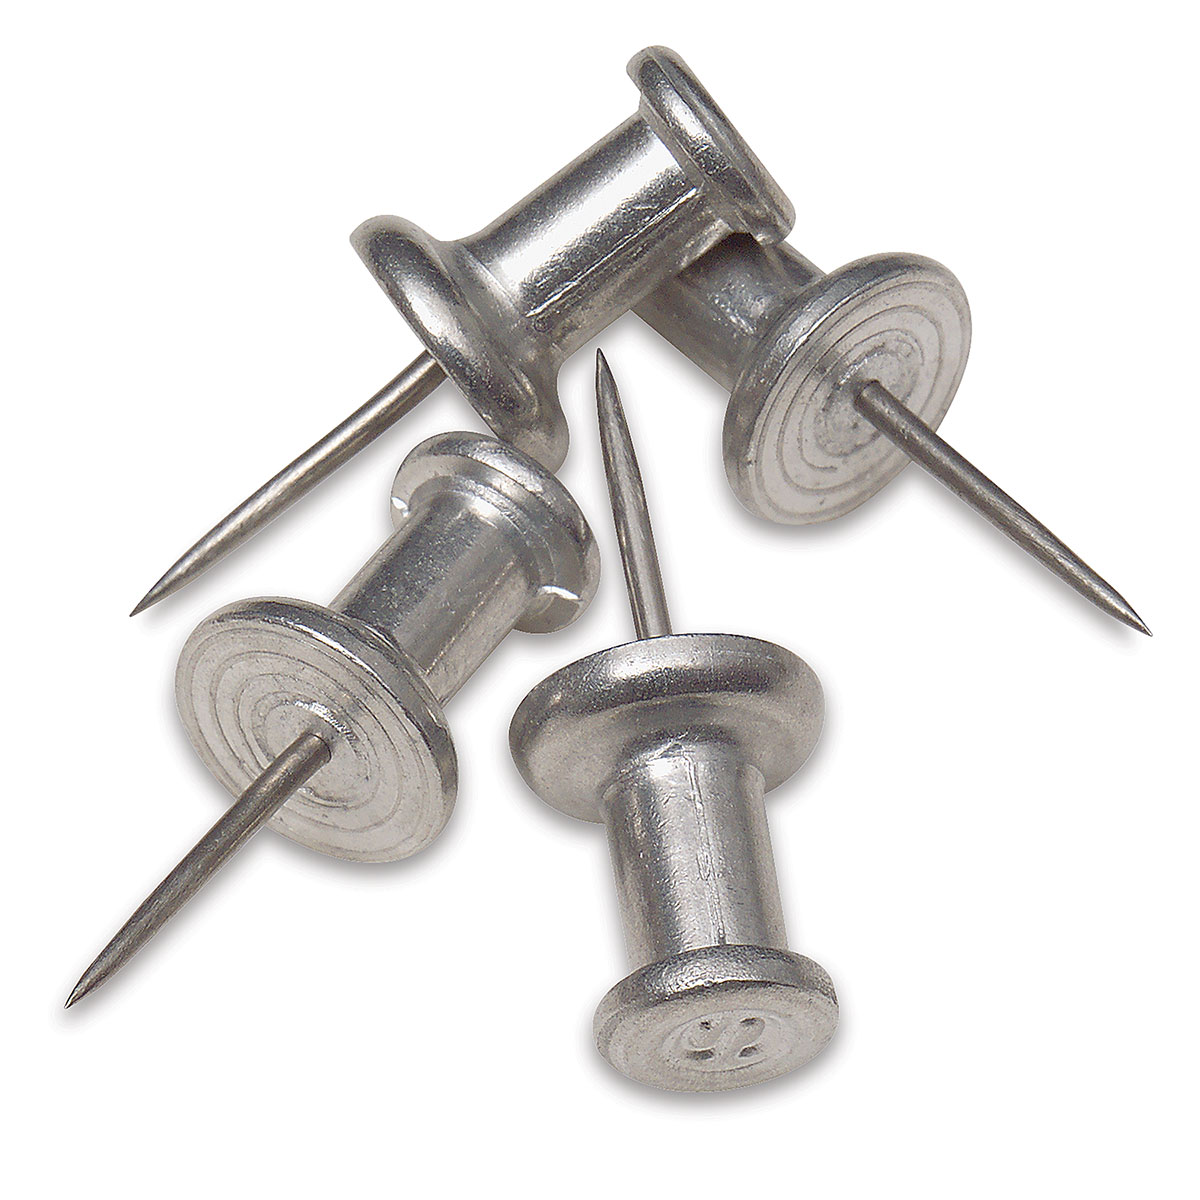 Jacquard Stainless Steel Push Pins - Box of 100